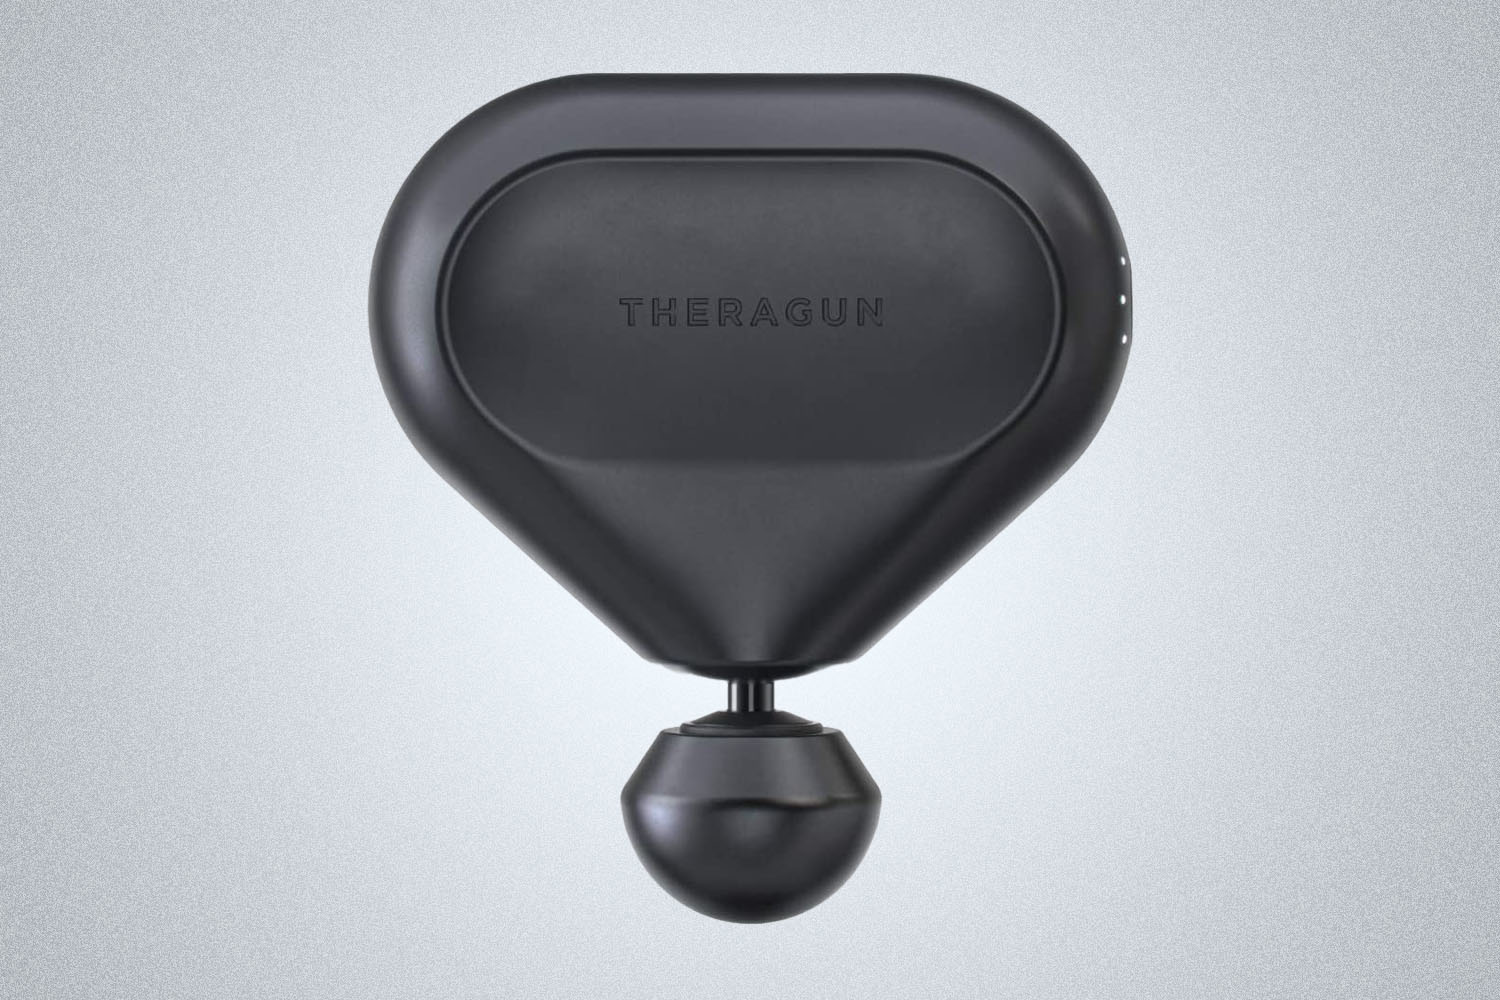 The Theragun Mini in black is a portable percussive massager for muscle relief after fitness workouts that is one of the best percussive massagers in 2021